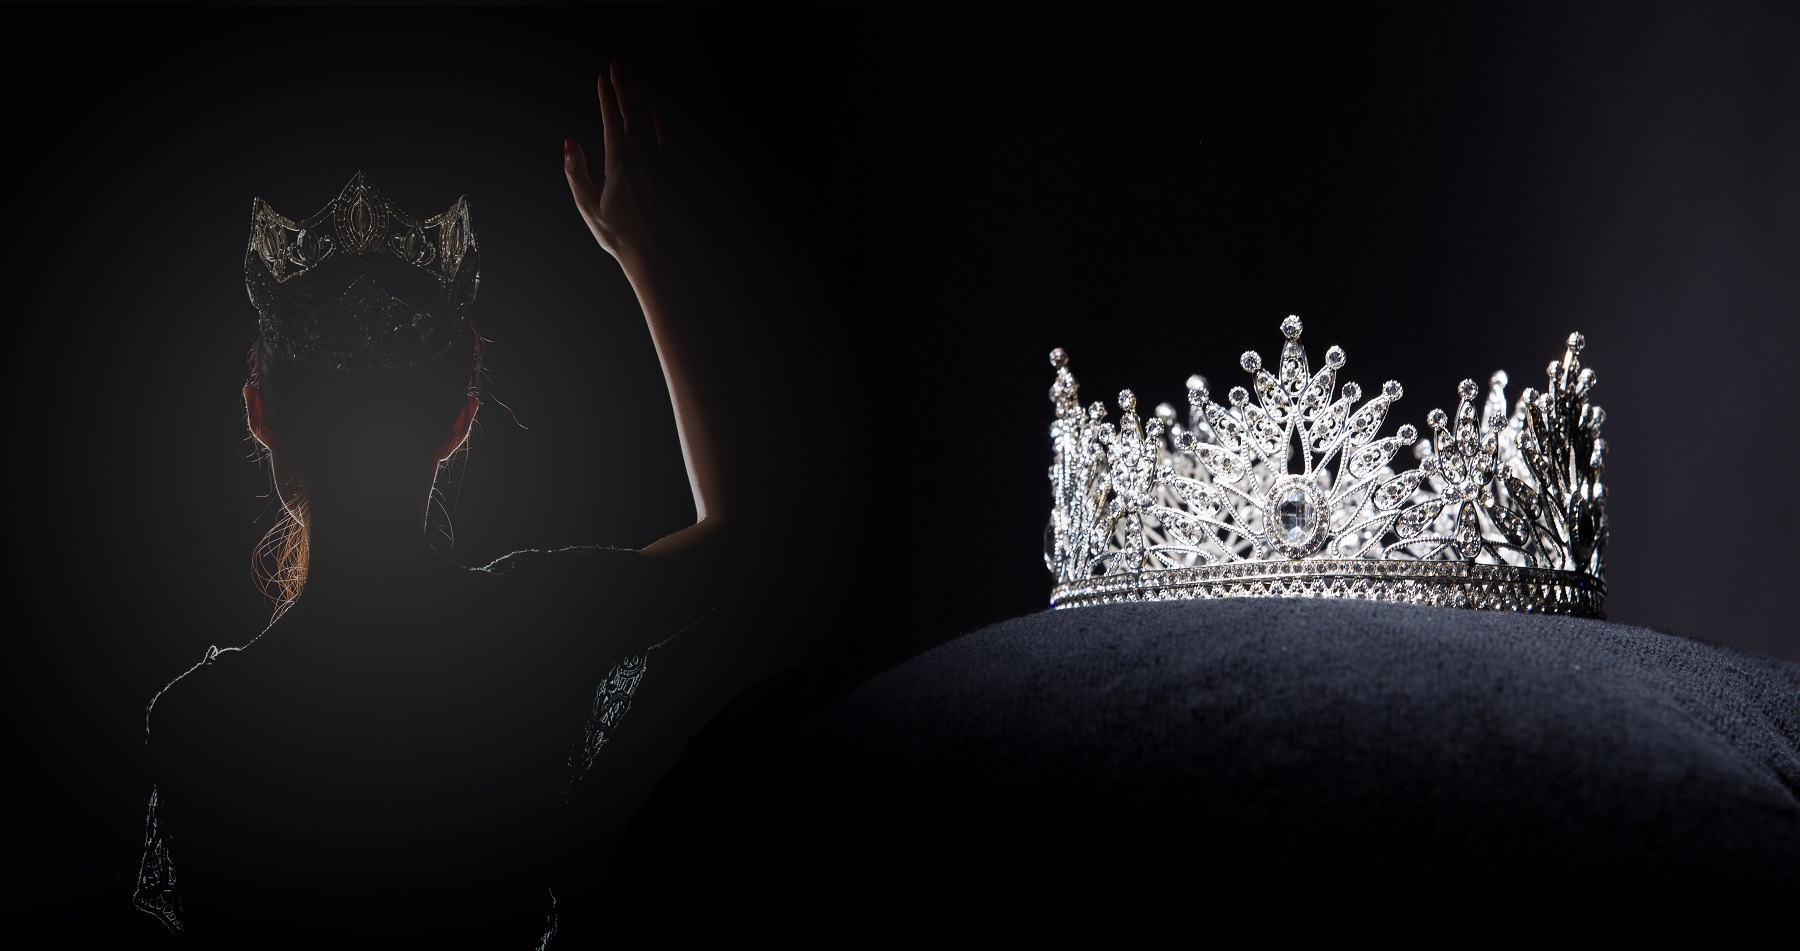 An image of the Miss Universe crown and a contestant